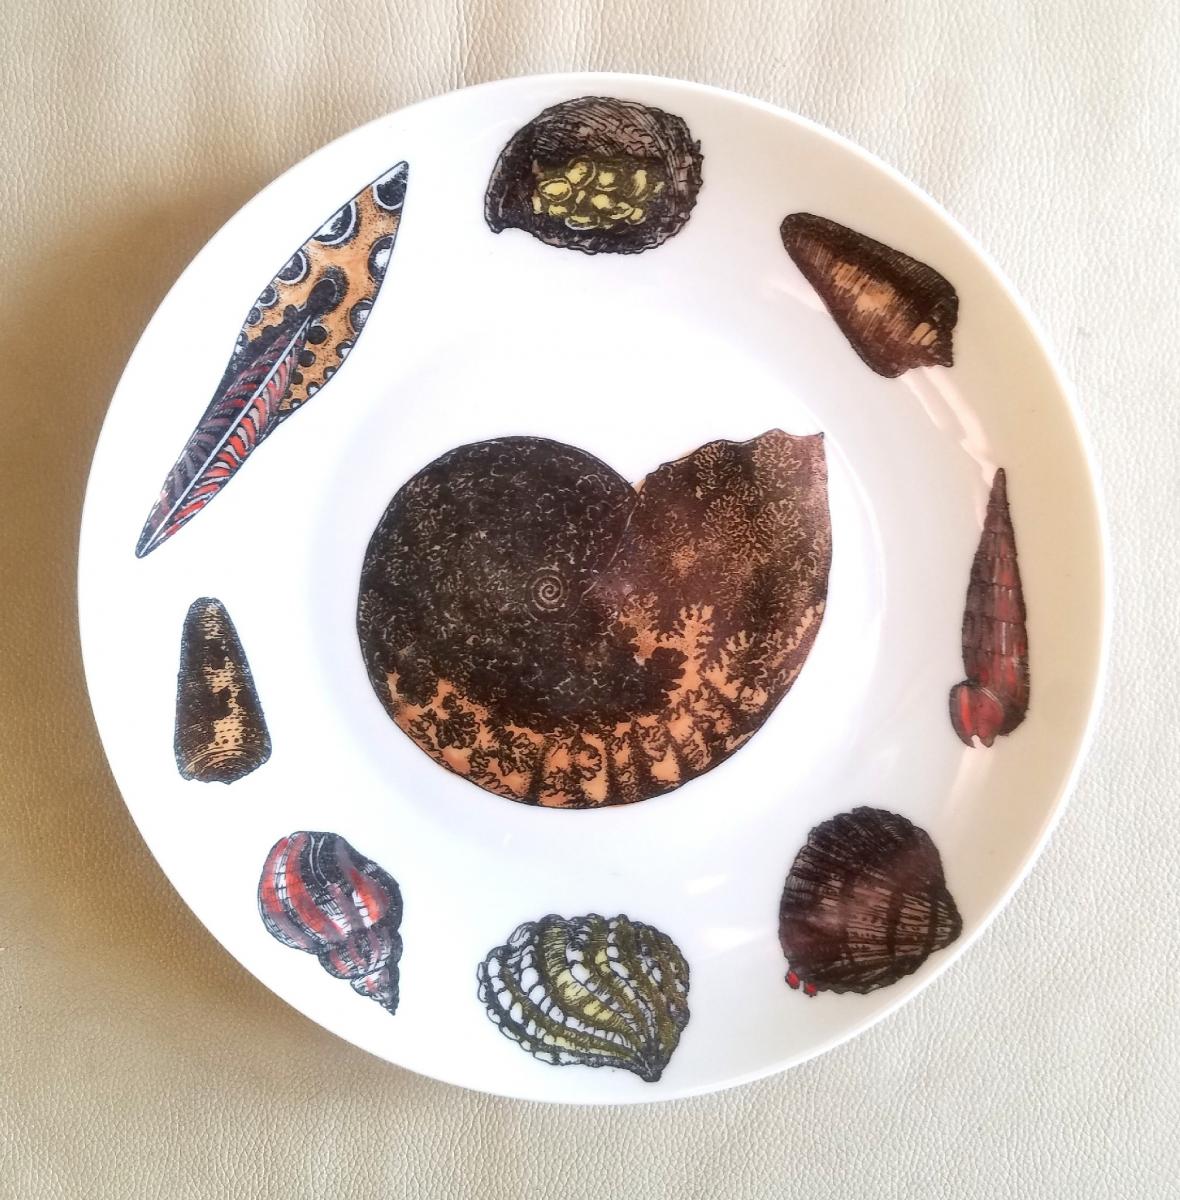 Piero Fornasetti Rare Dishes Decorated With Sea Anemones, Urchins & Shells, Conchiglie Pattern, Circa 1960's-early 1970's